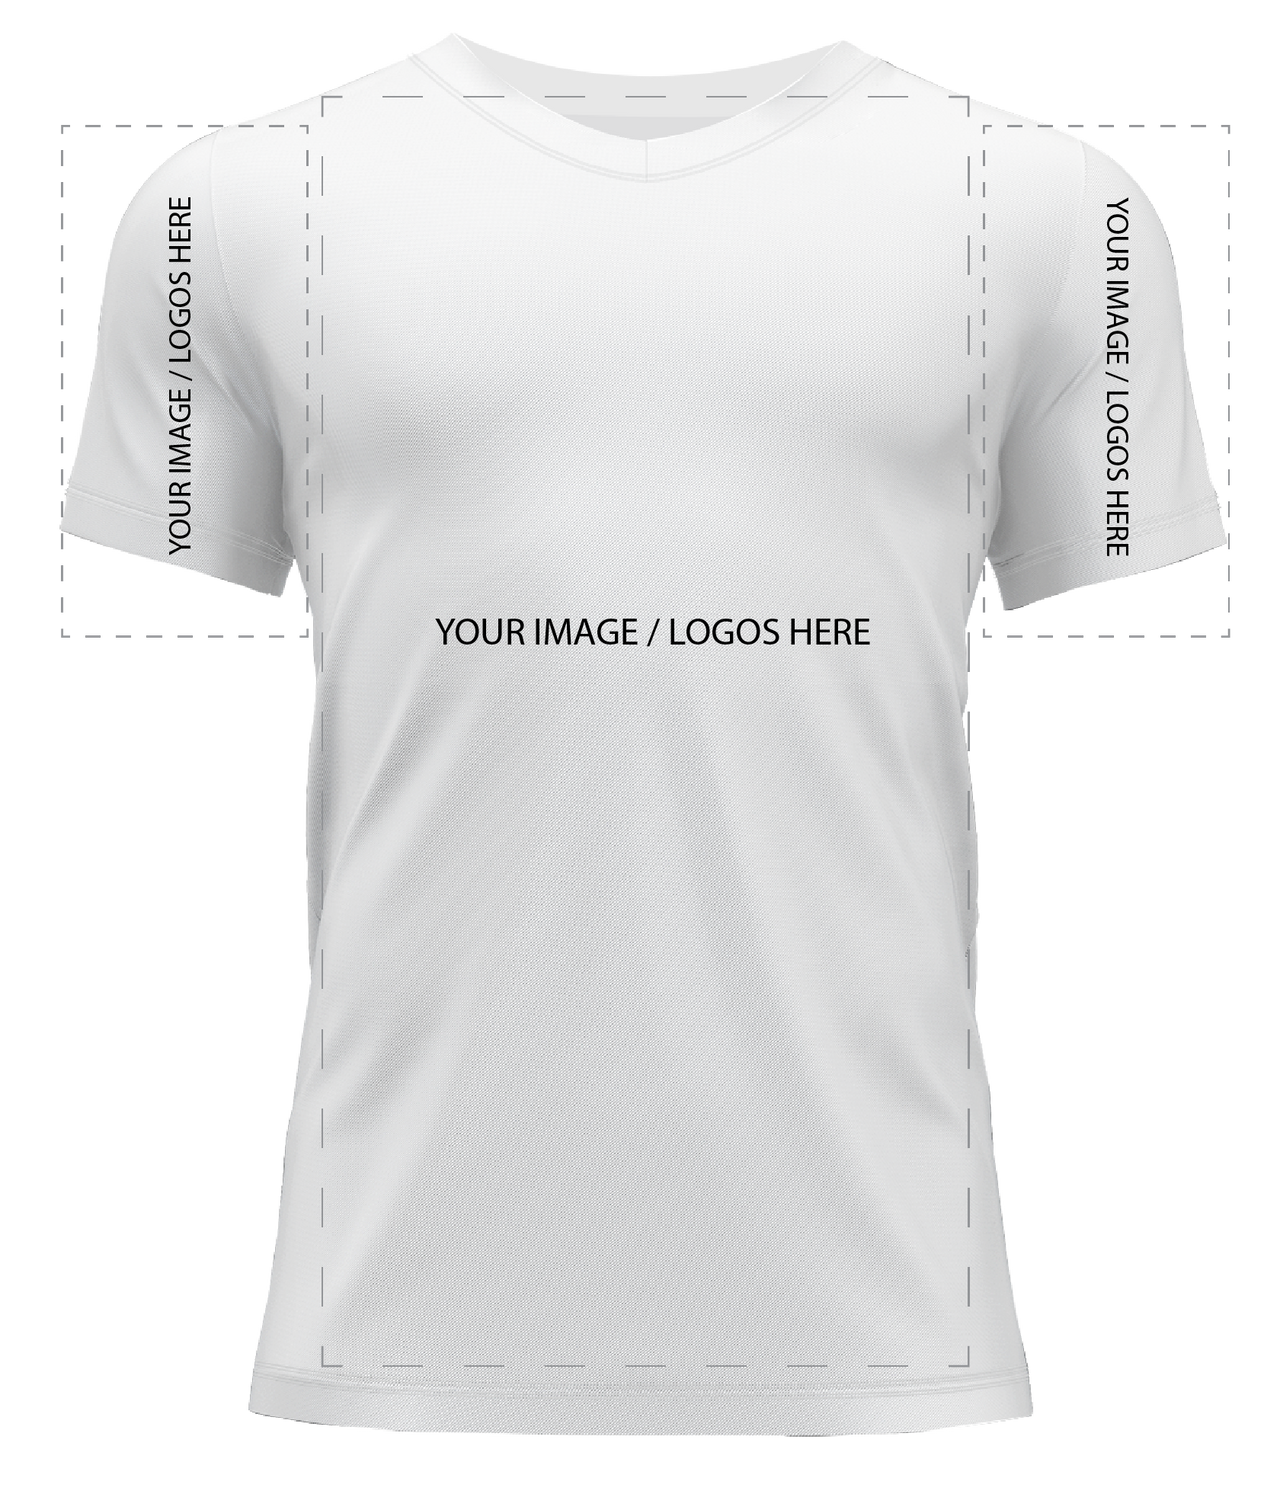 build your own jerseys online custom team apparel and screen printing